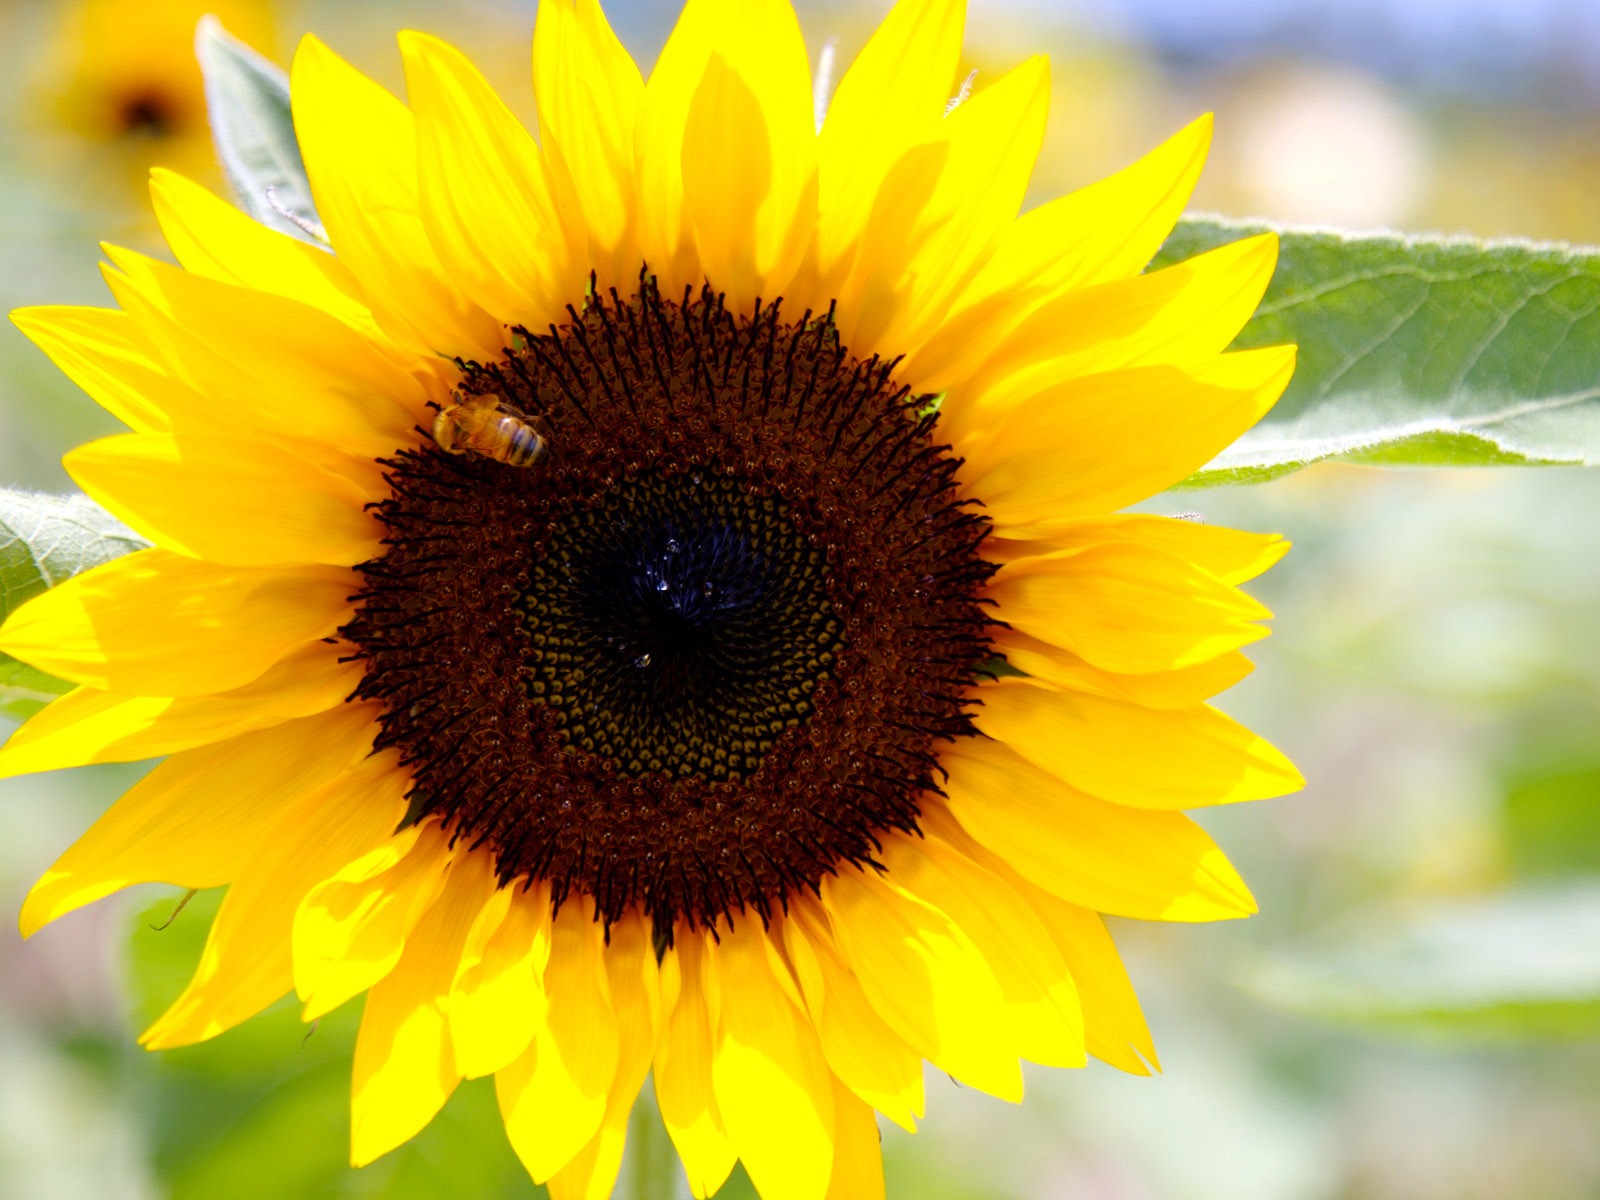 Sunny sunflower photo HD Wallpapers #22 - 1600x1200